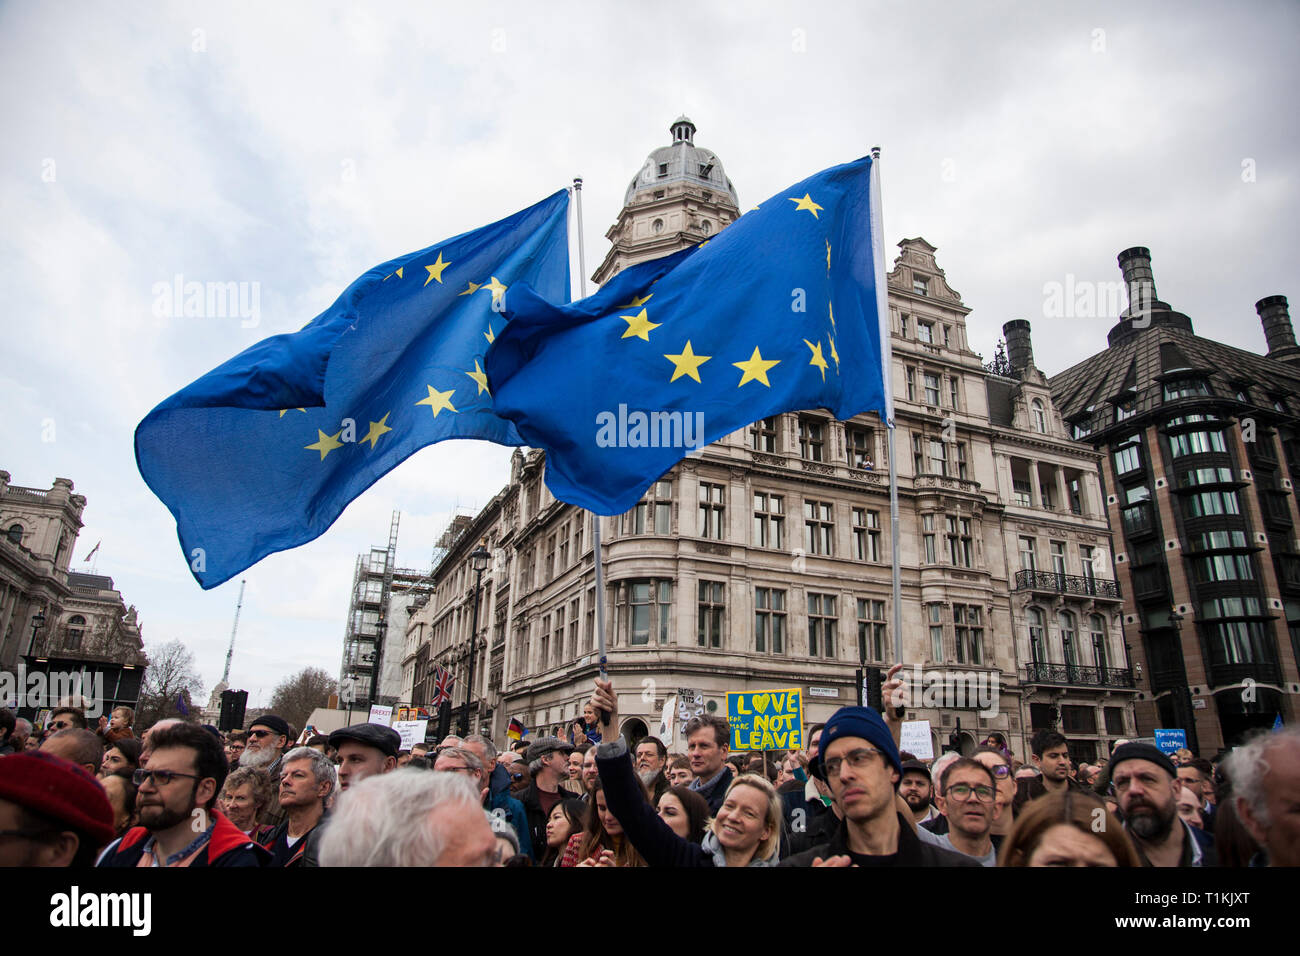 LONDON, UK - March 23rd 2019: Crowds of anti brexit supporters on a People's vote political march in London Stock Photo